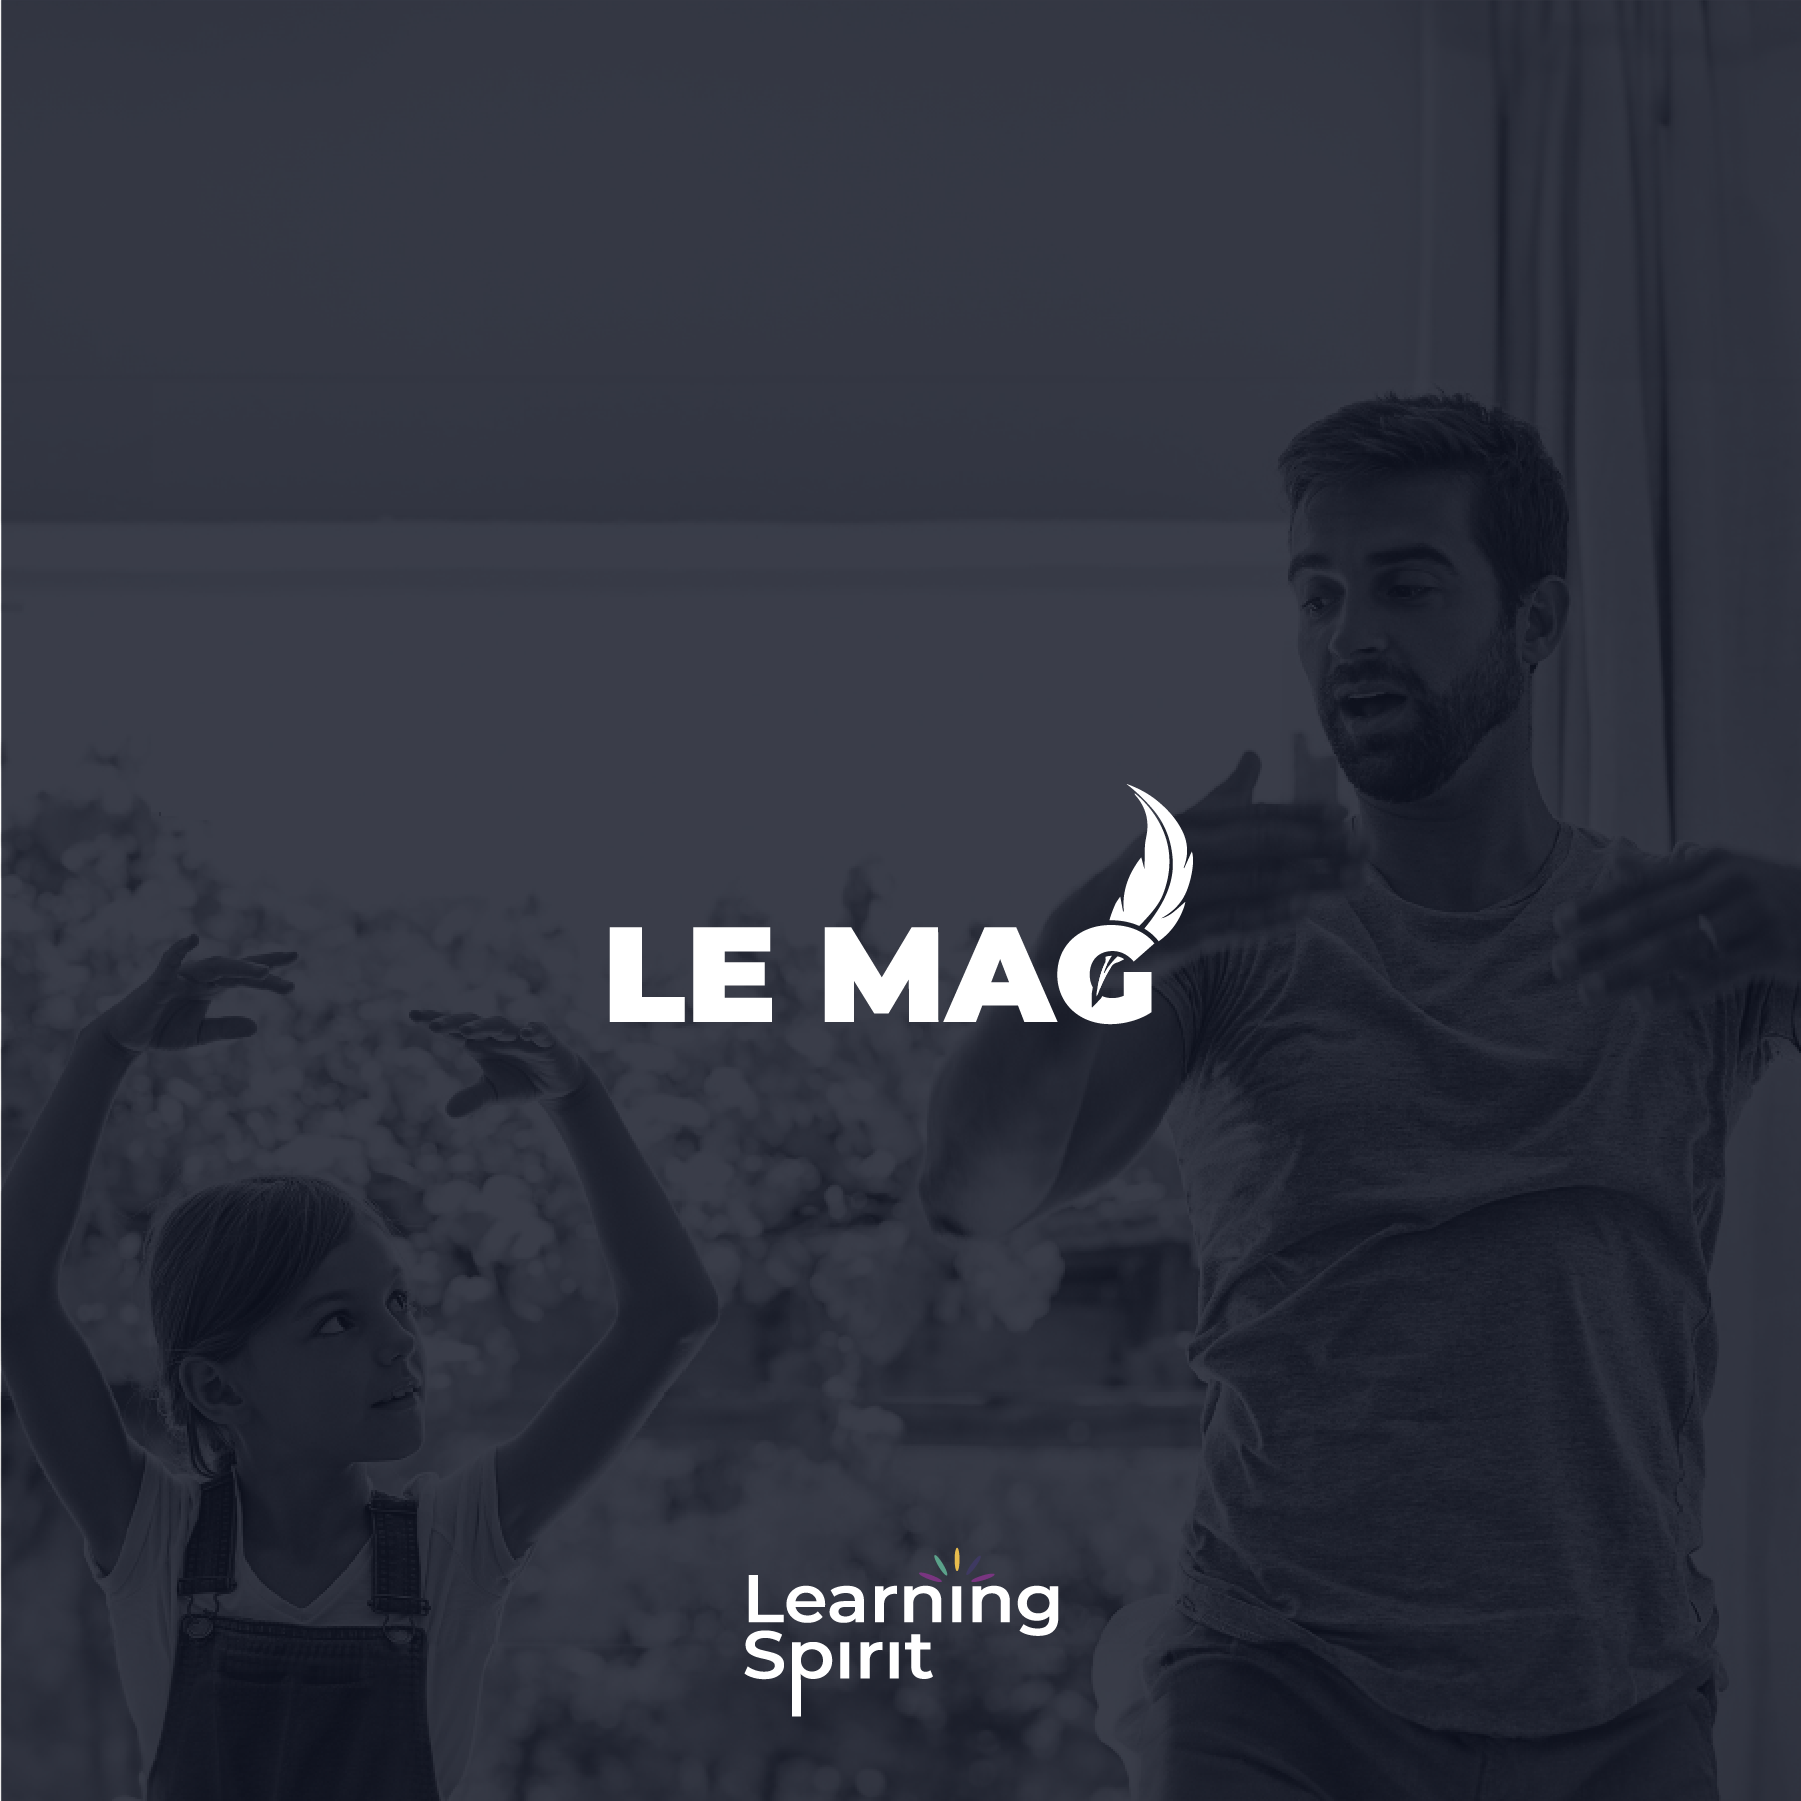 Le Mag Learning